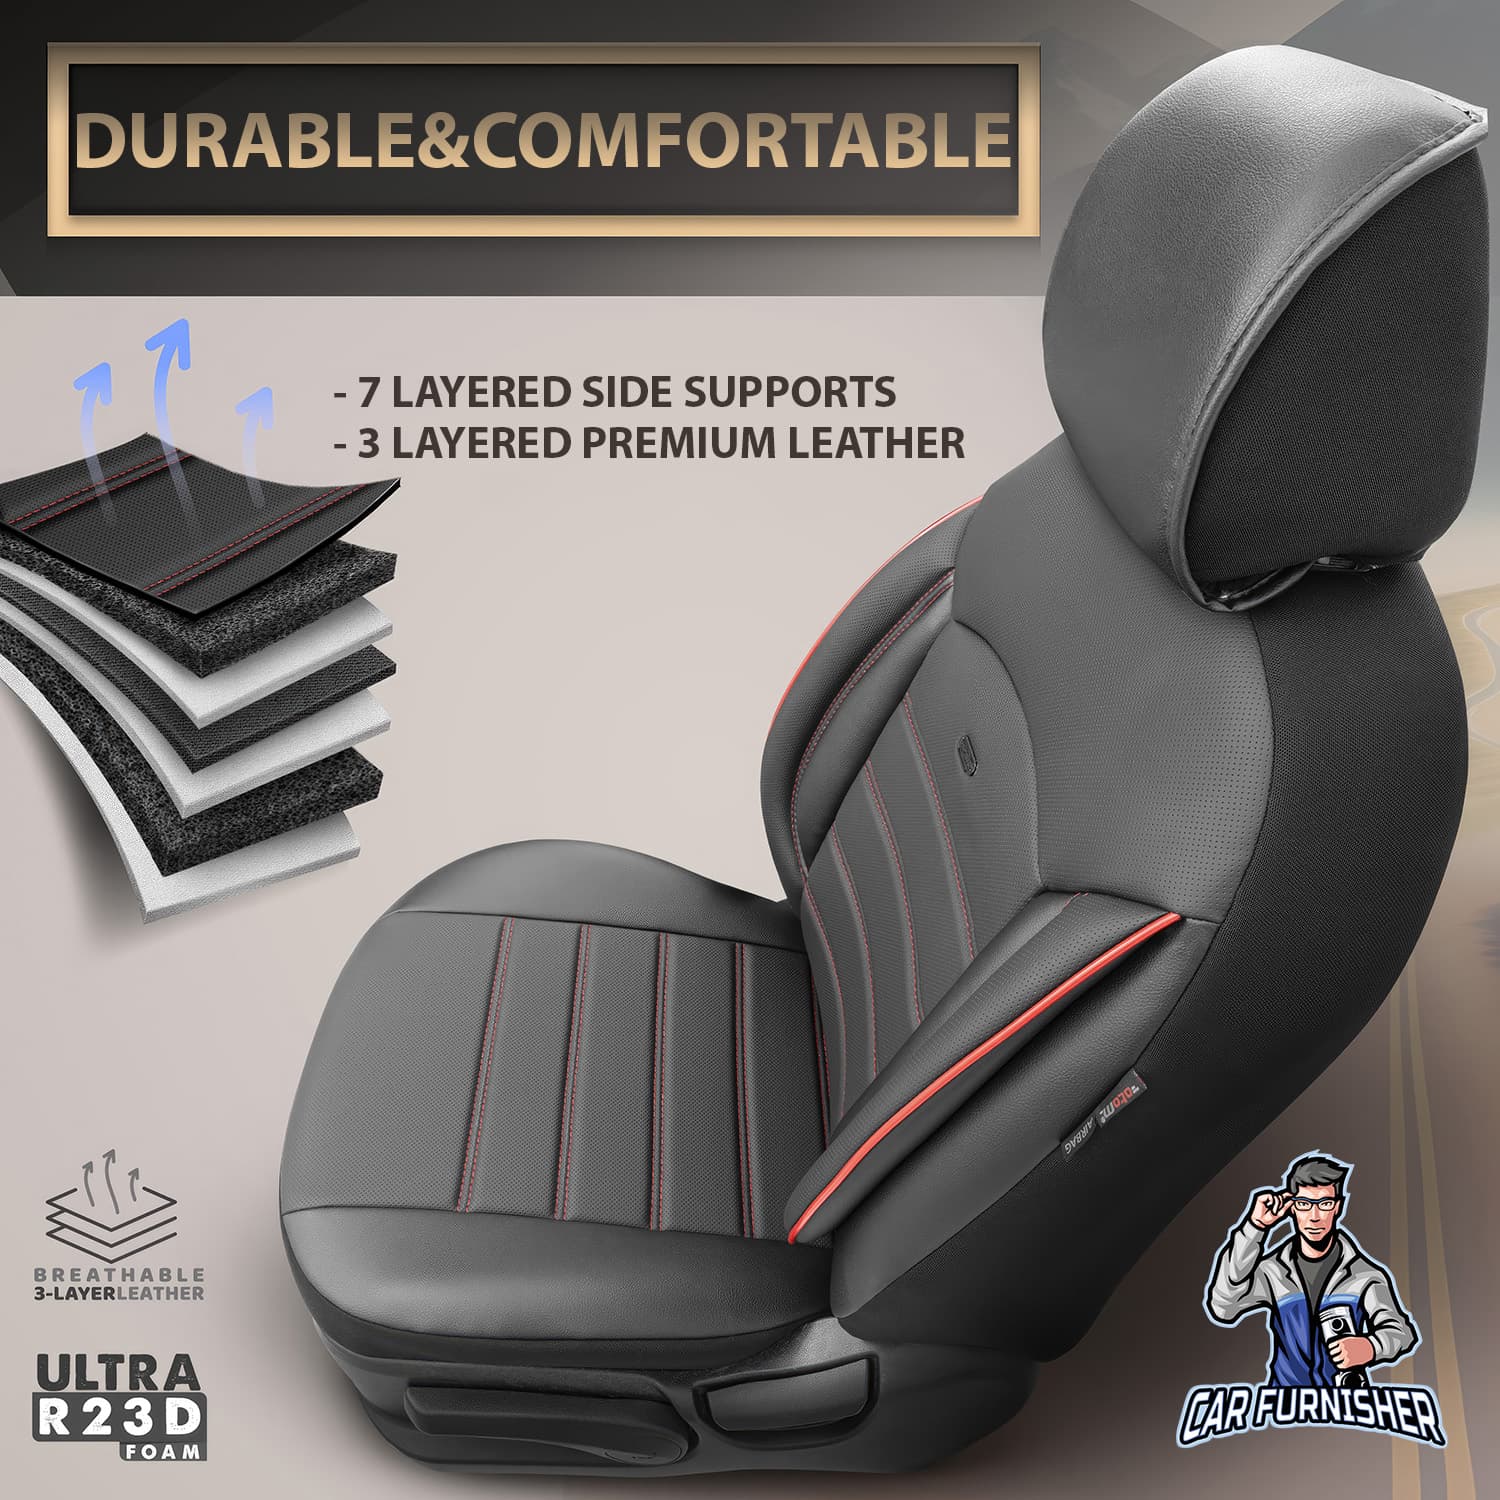 Mercedes 190 Seat Covers Inspire Design Dark Red 5 Seats + Headrests (Full Set) Full Leather